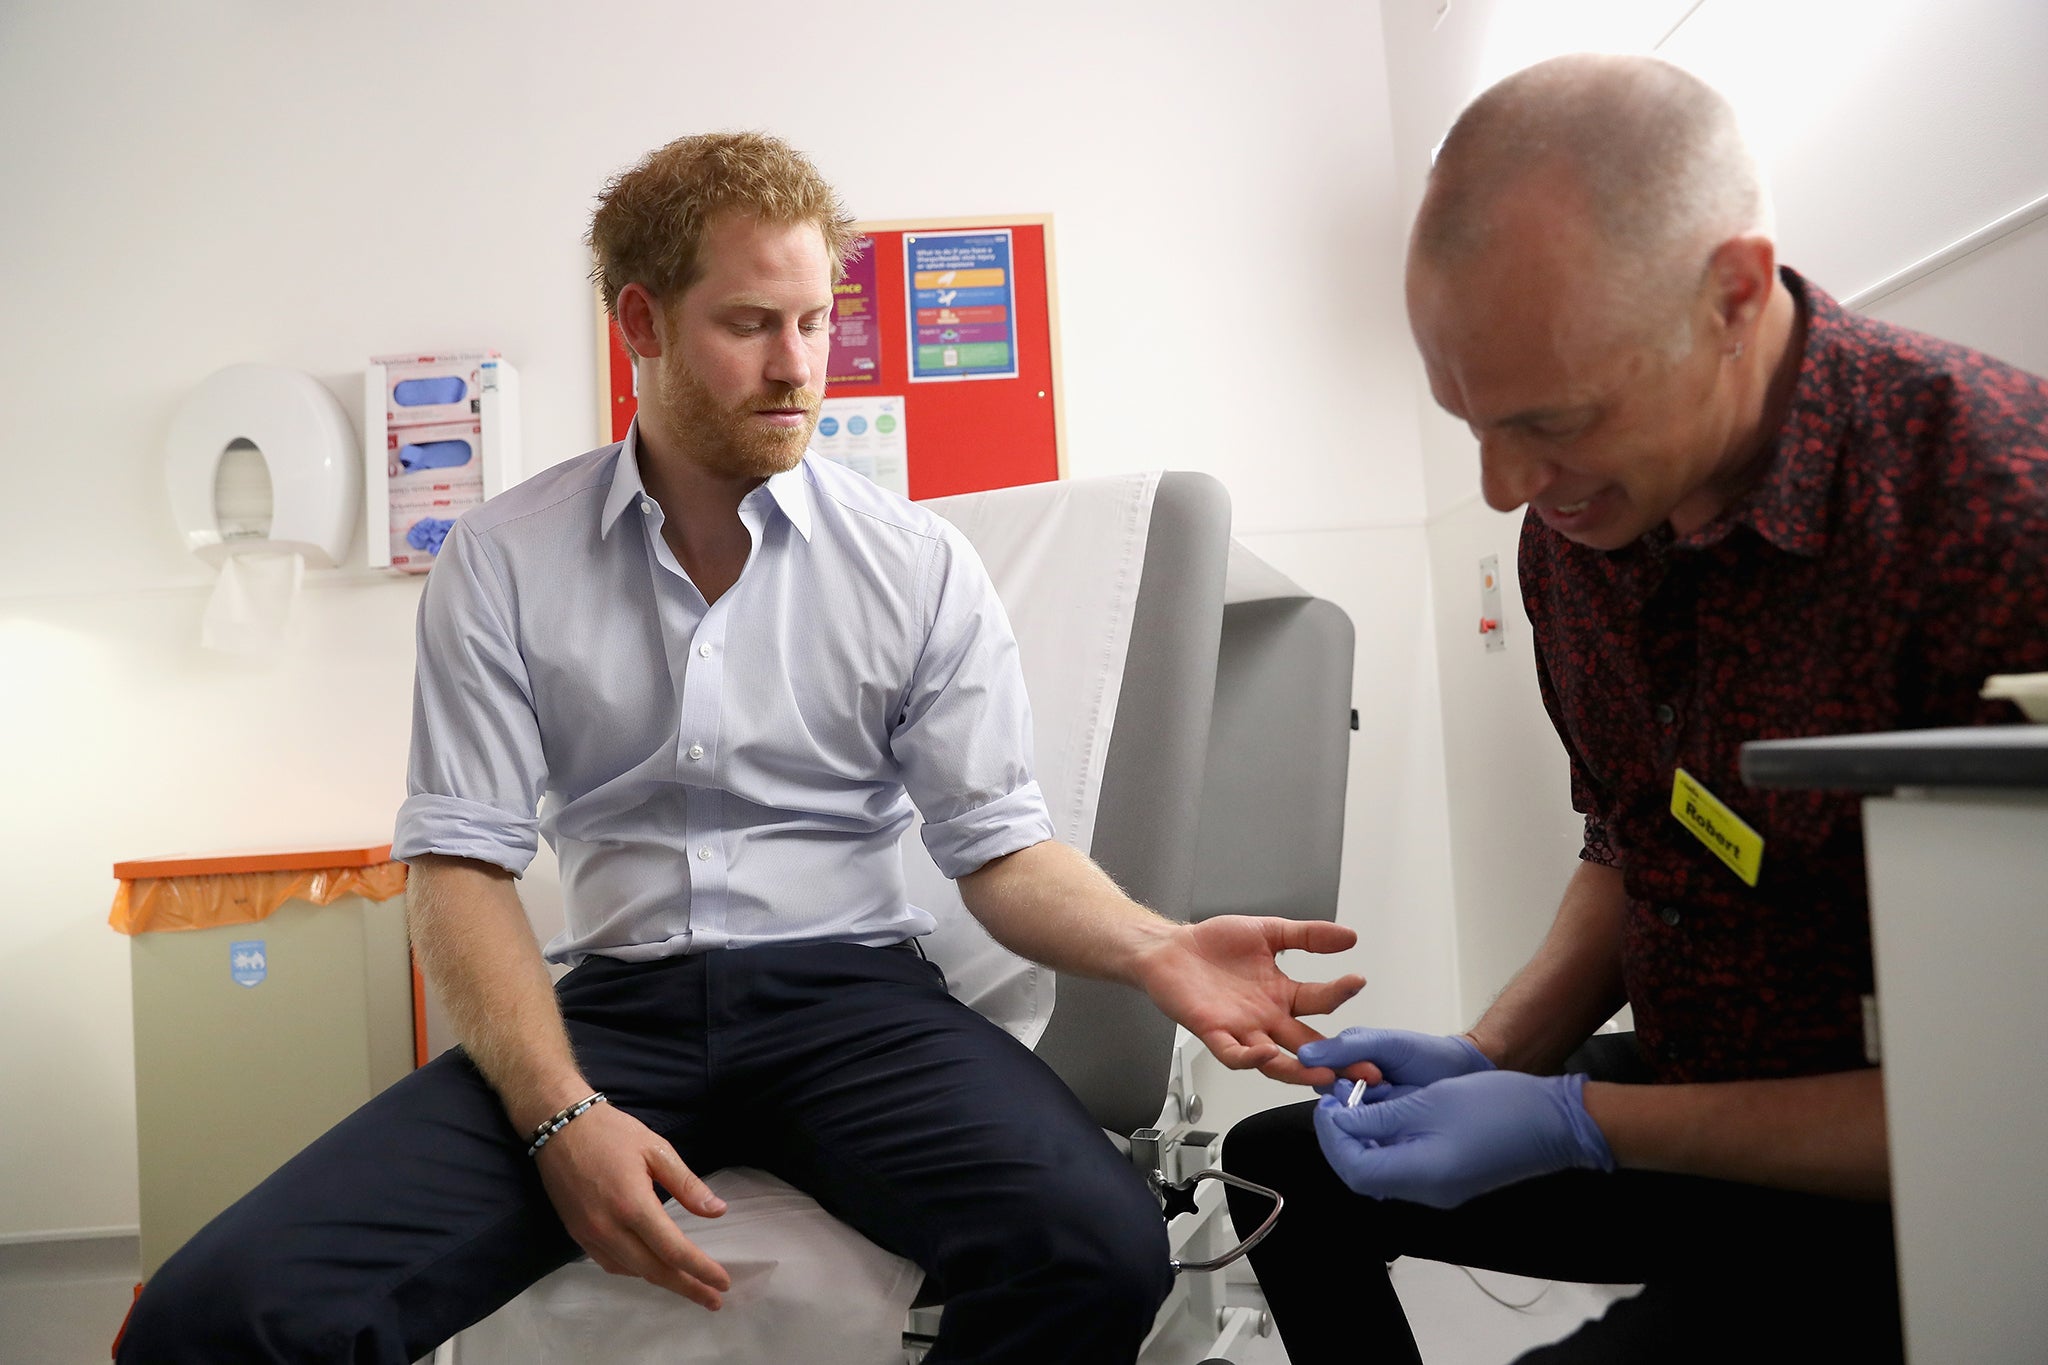 Prince Harry has his blood taken during an HIV test to raise awareness for the importance of getting tested for HIV and other STDs